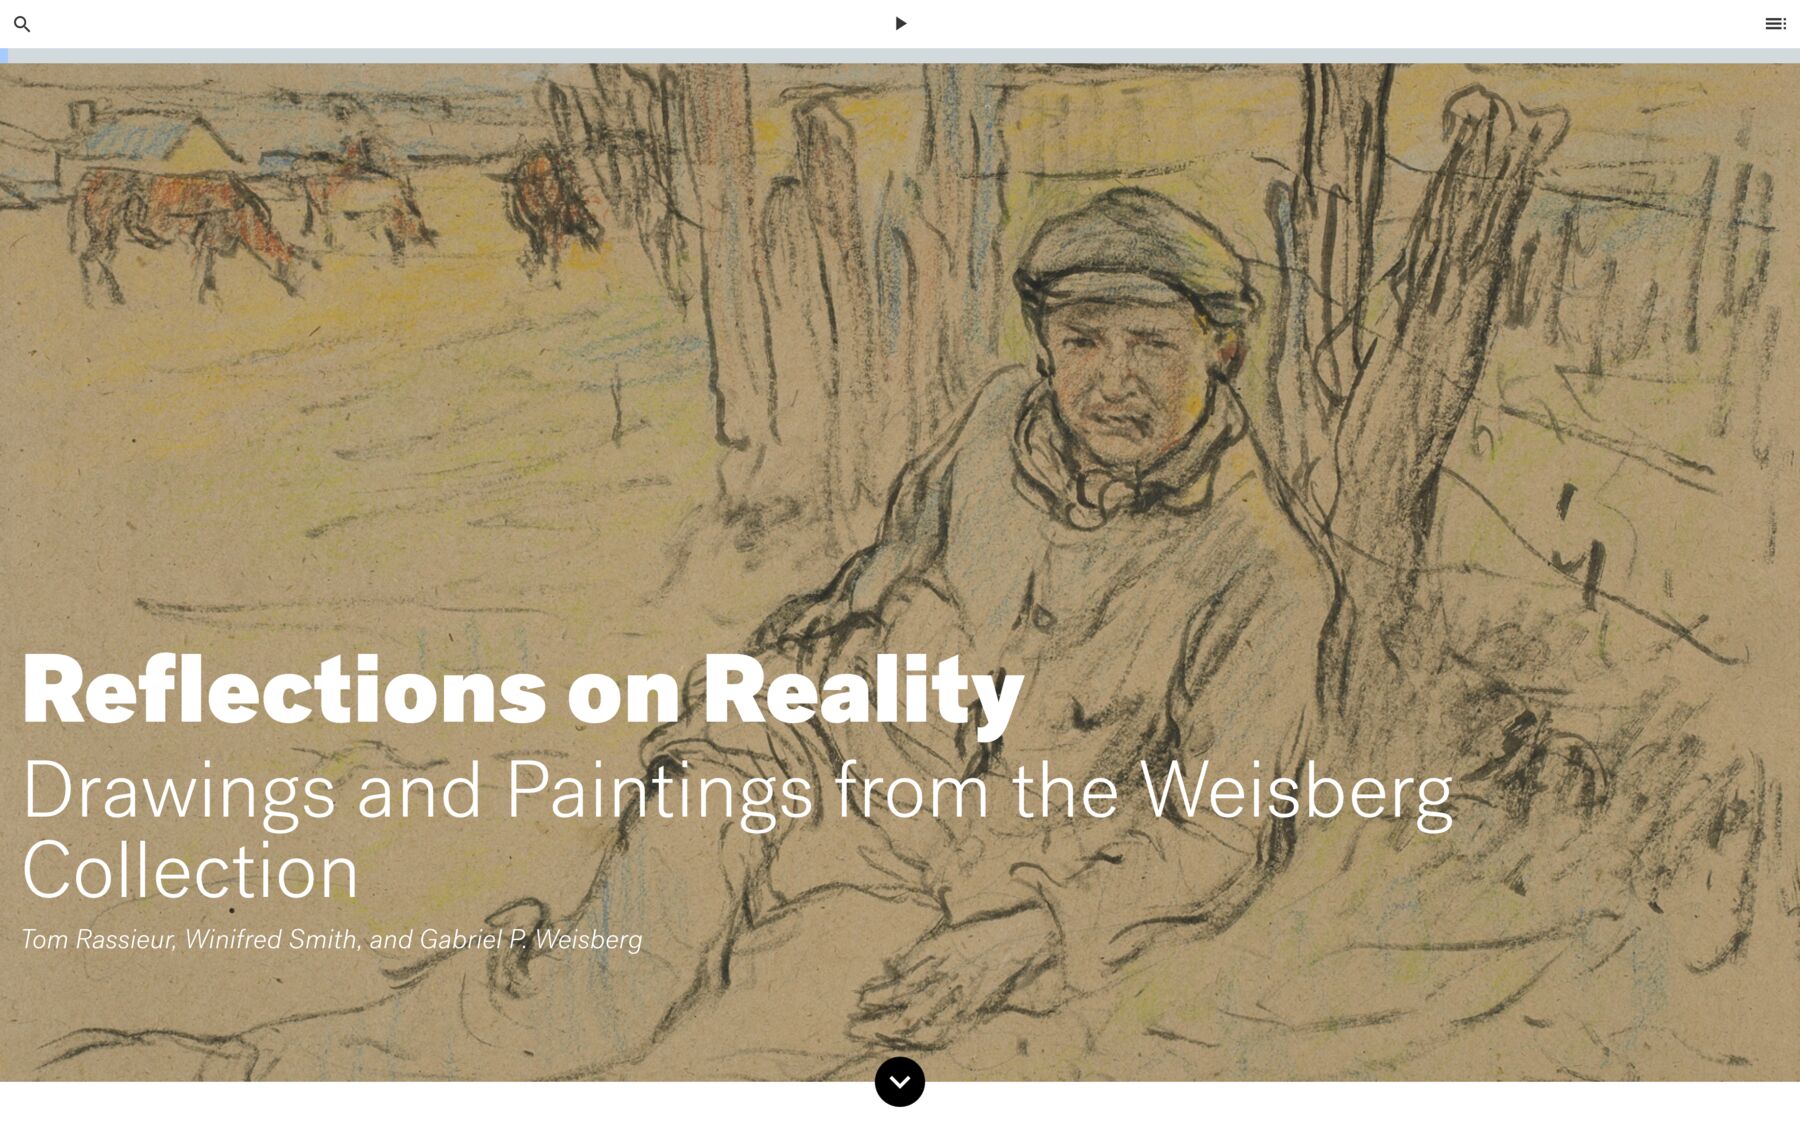 Reflections on Reality: Drawings and Paintings from the Weisberg Collection. Tom Rassieur, Winifred Smith, and Gabriel P. Weisberg